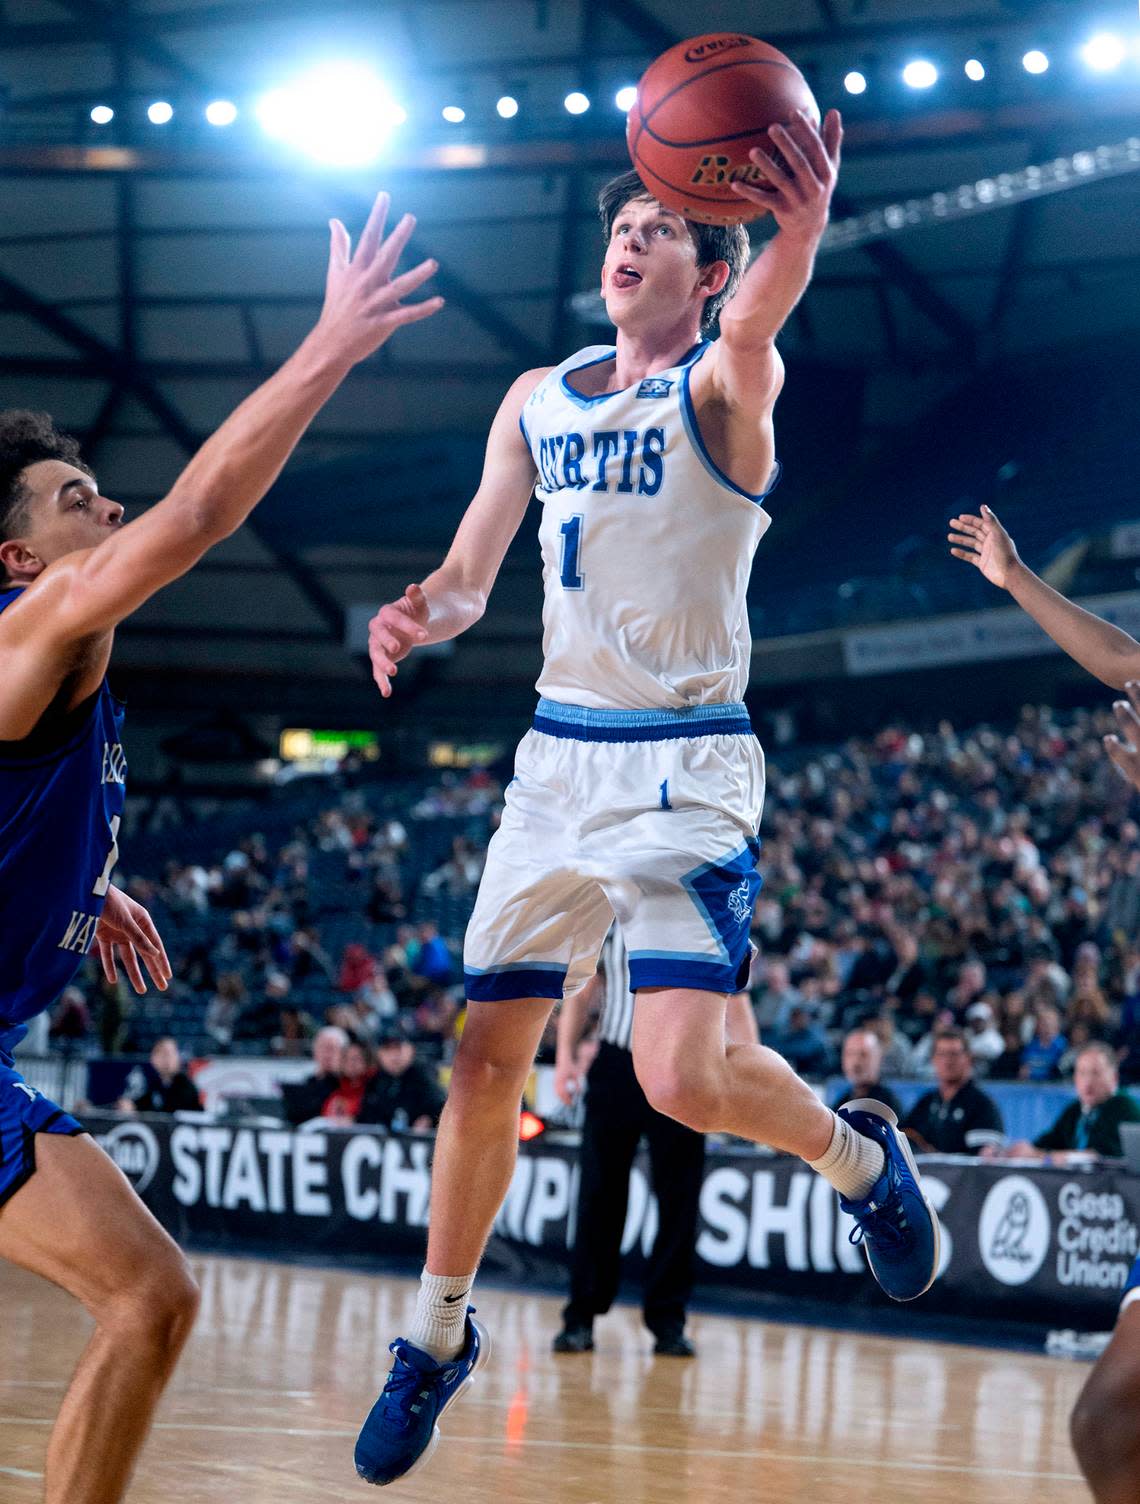 Curtis’ Tyce Paulsen flies to the hoop in front of Federal Way defender Dace Pleasant during their state semifinal game at the WIAA state basketball tournament in the Tacoma Dome in Tacoma, Washington, on Friday, March 3, 2023. Curtis won the game, 56-43.